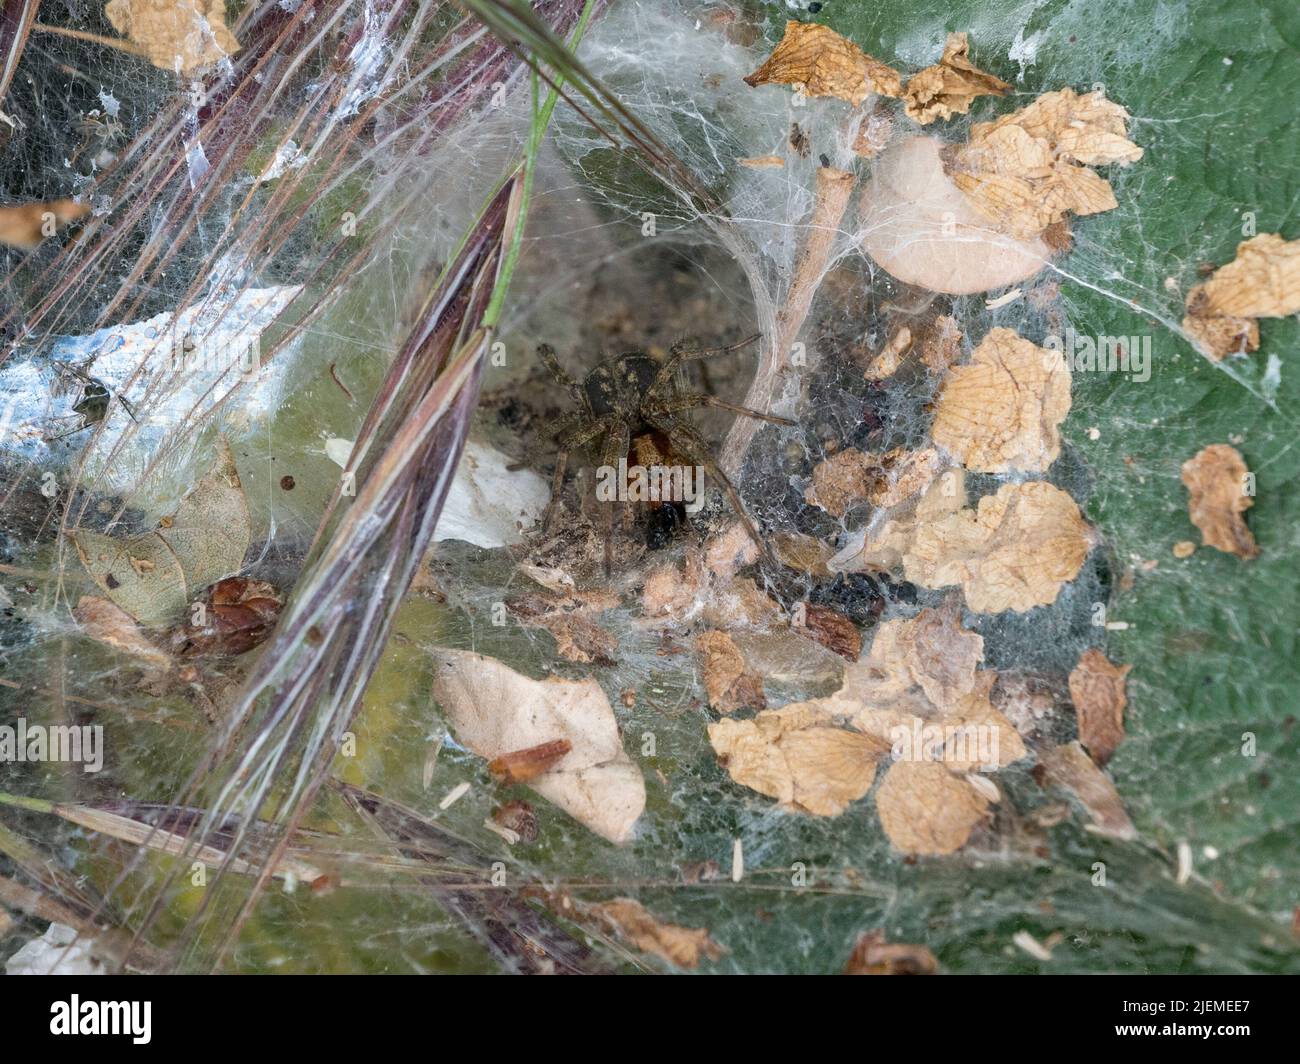 A  Labyrinth spider (Agelena labyrinthica) sitting in its funnel web on Hounslow Heath, London, UK. Stock Photo